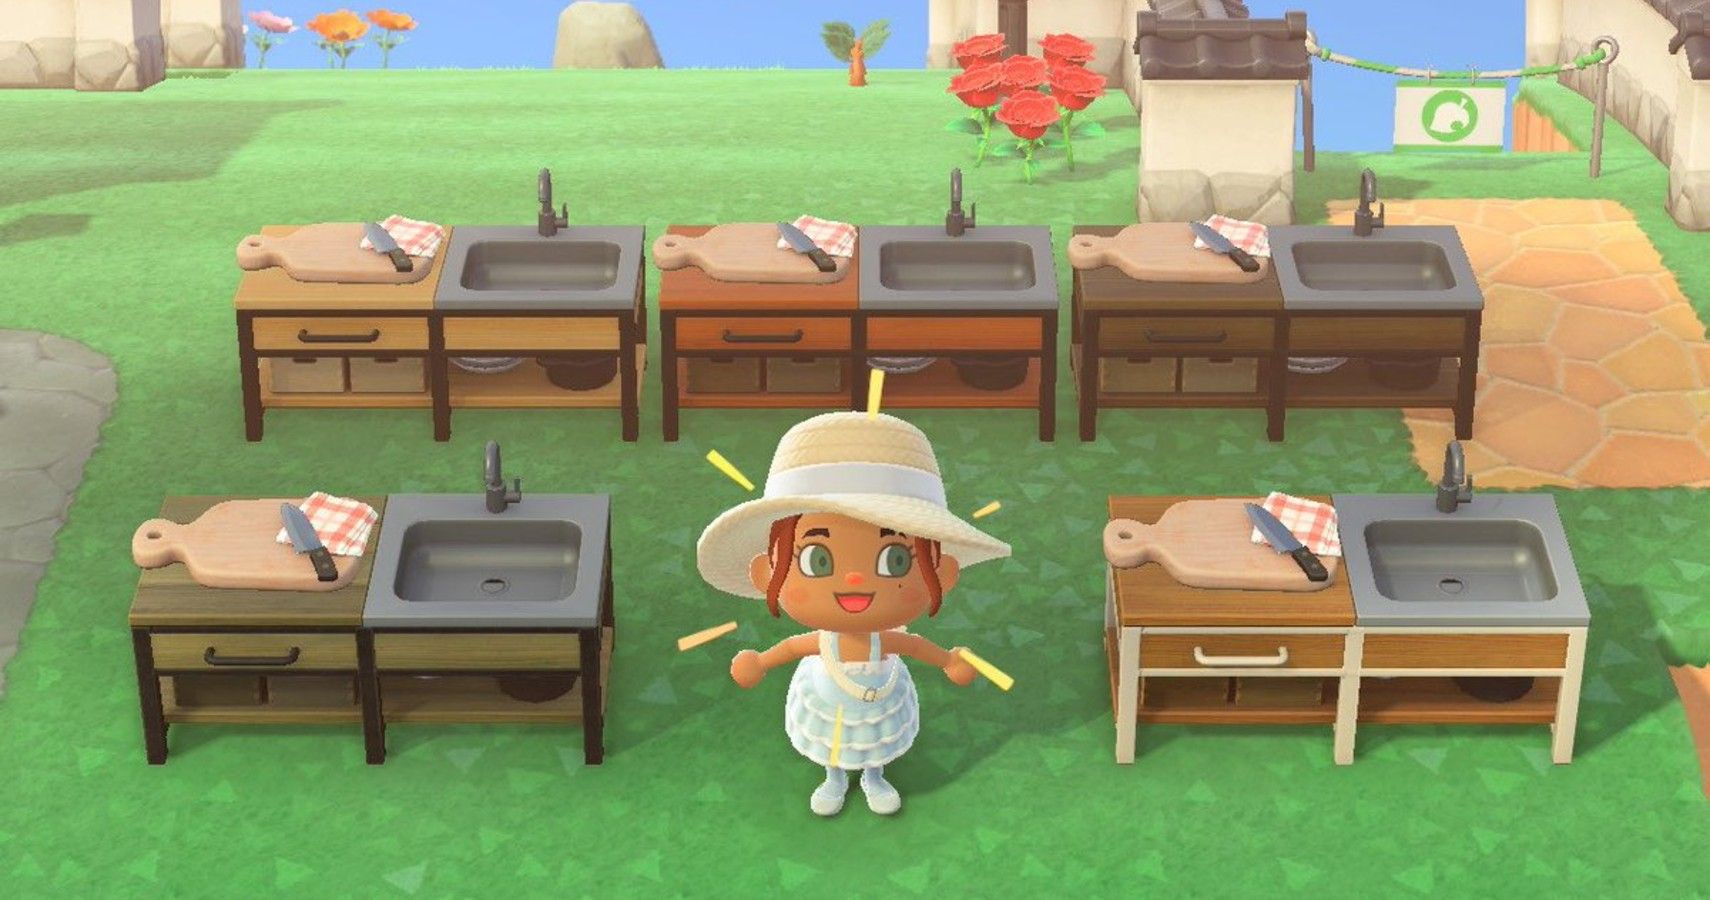 Animal Crossing New Horizon Players Are Frustrated About Lack Of Ironwood Kitchenettes